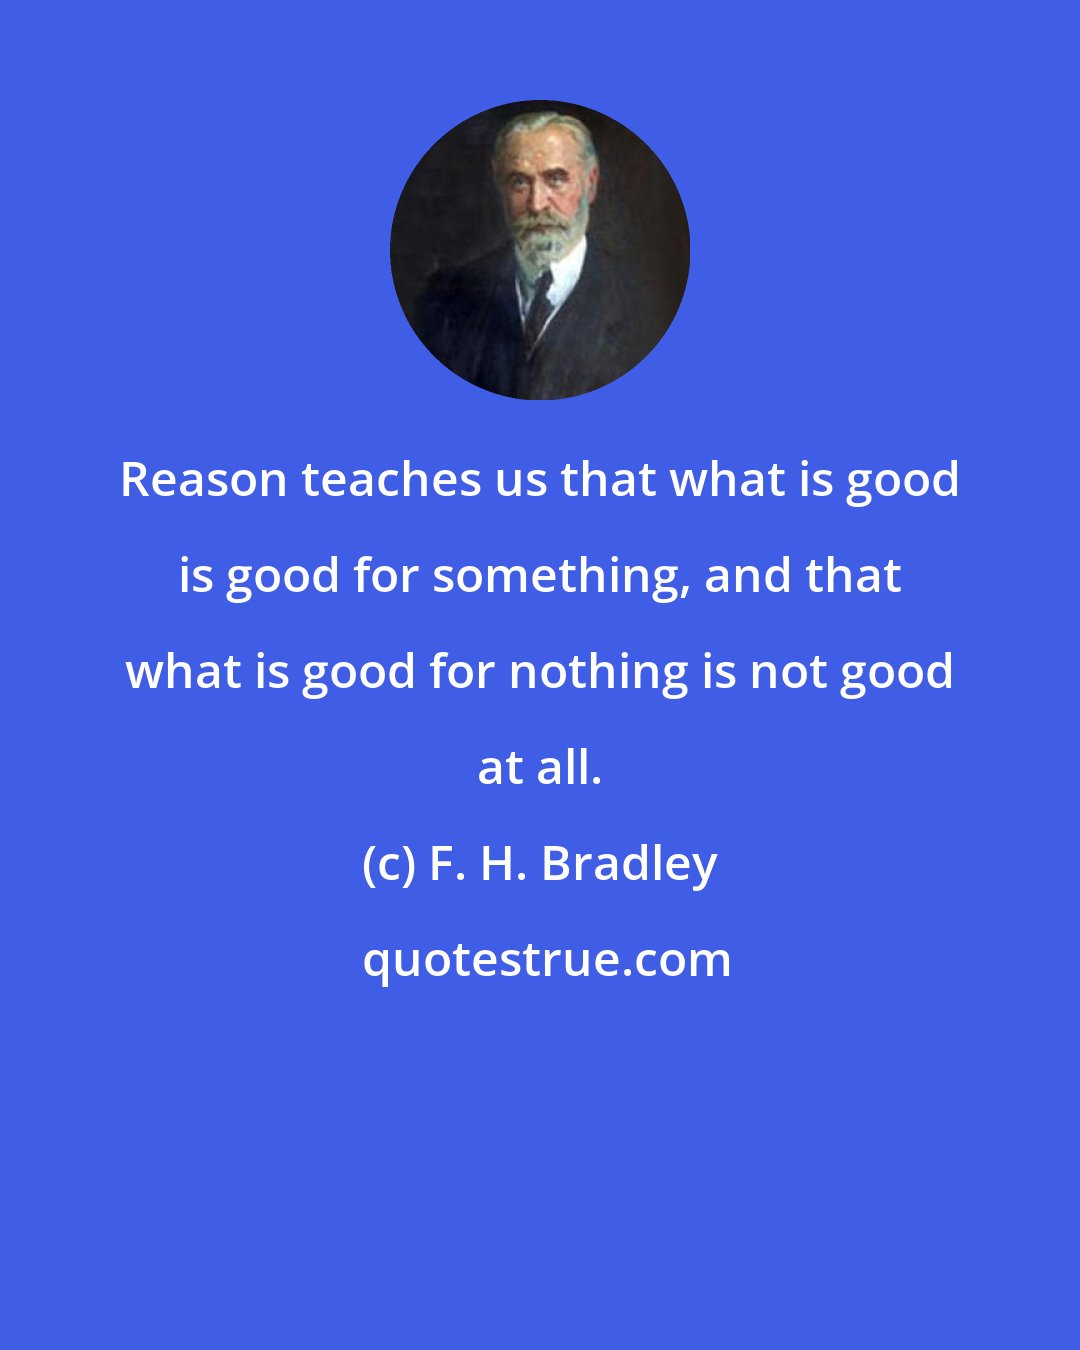 F. H. Bradley: Reason teaches us that what is good is good for something, and that what is good for nothing is not good at all.